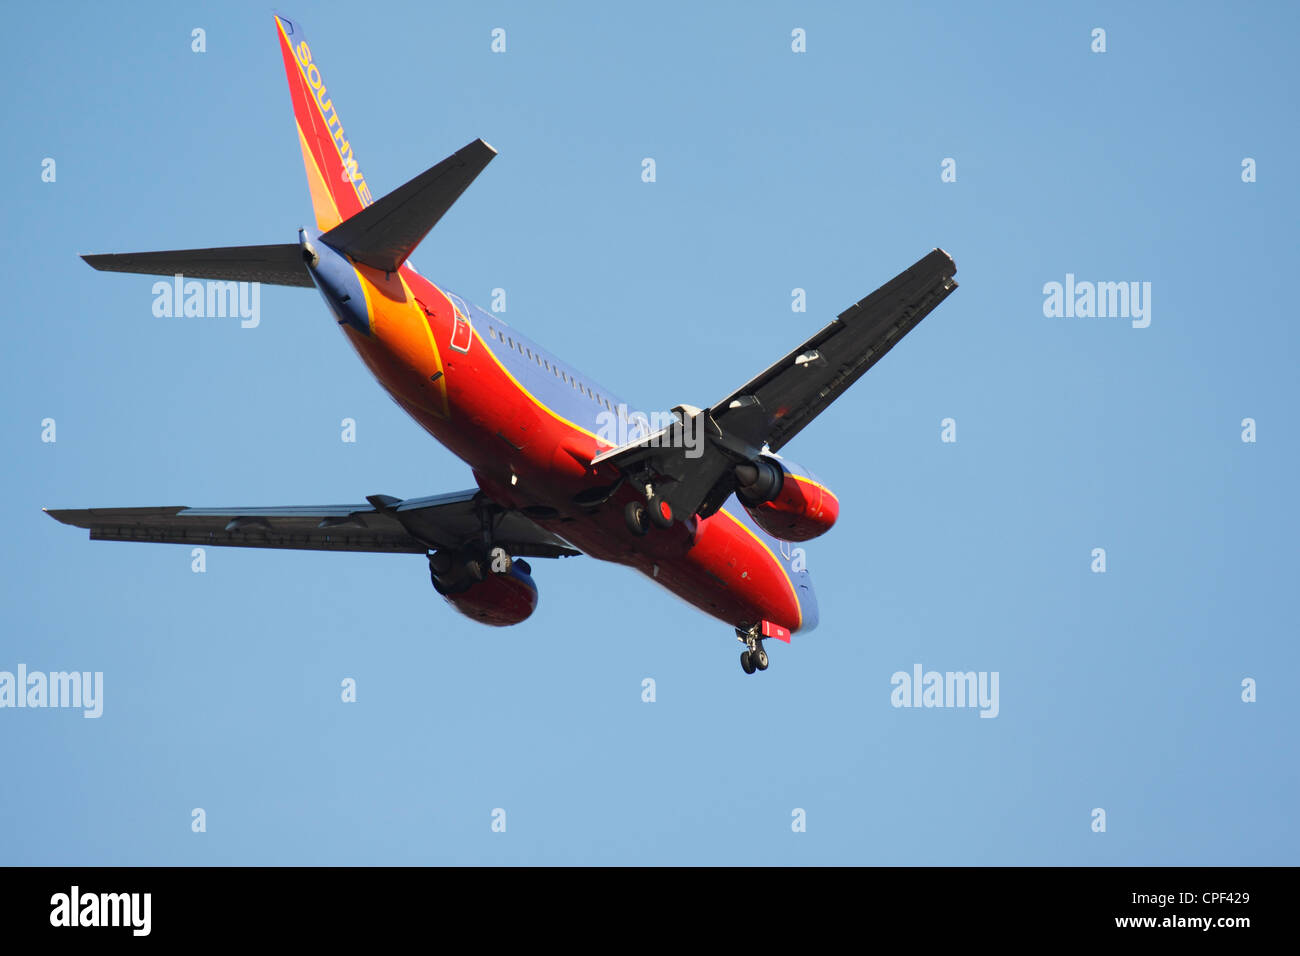 An airliner descends for landing Stock Photo